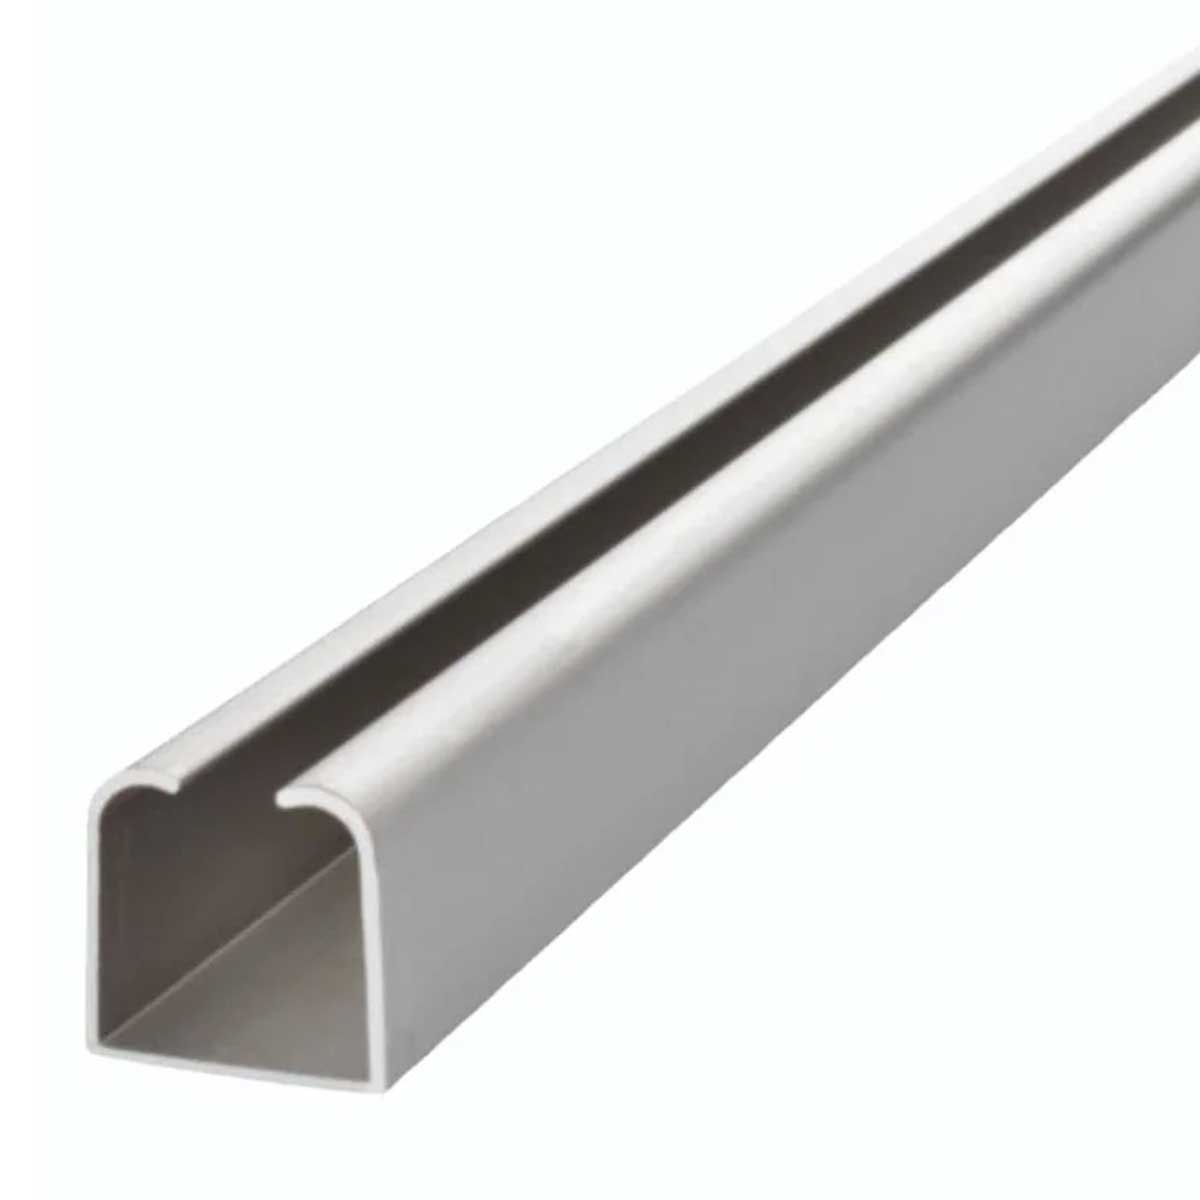 Sliding Door Aluminium C Channel Profile Manufacturers, Suppliers in Pathankot